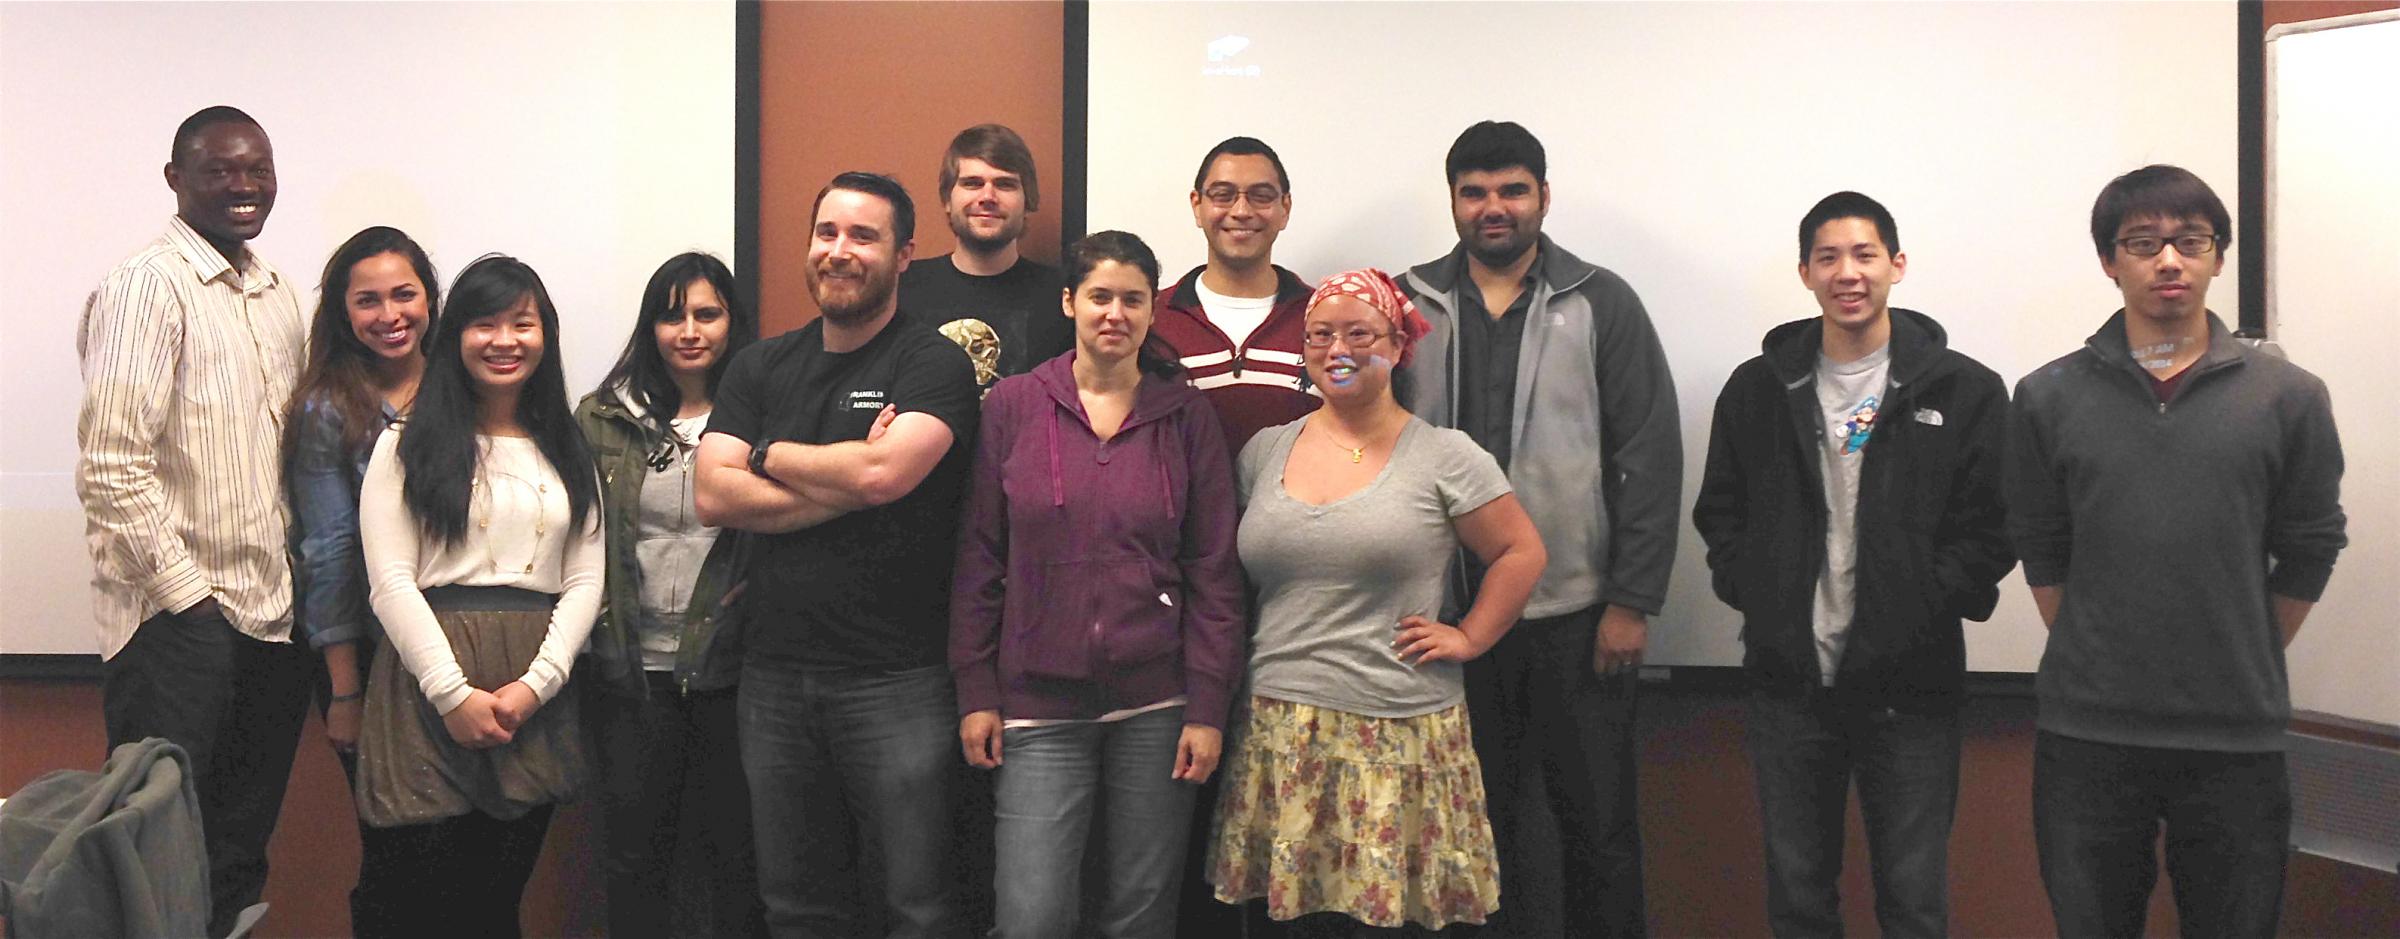 Cohort 4 Class students in 2013